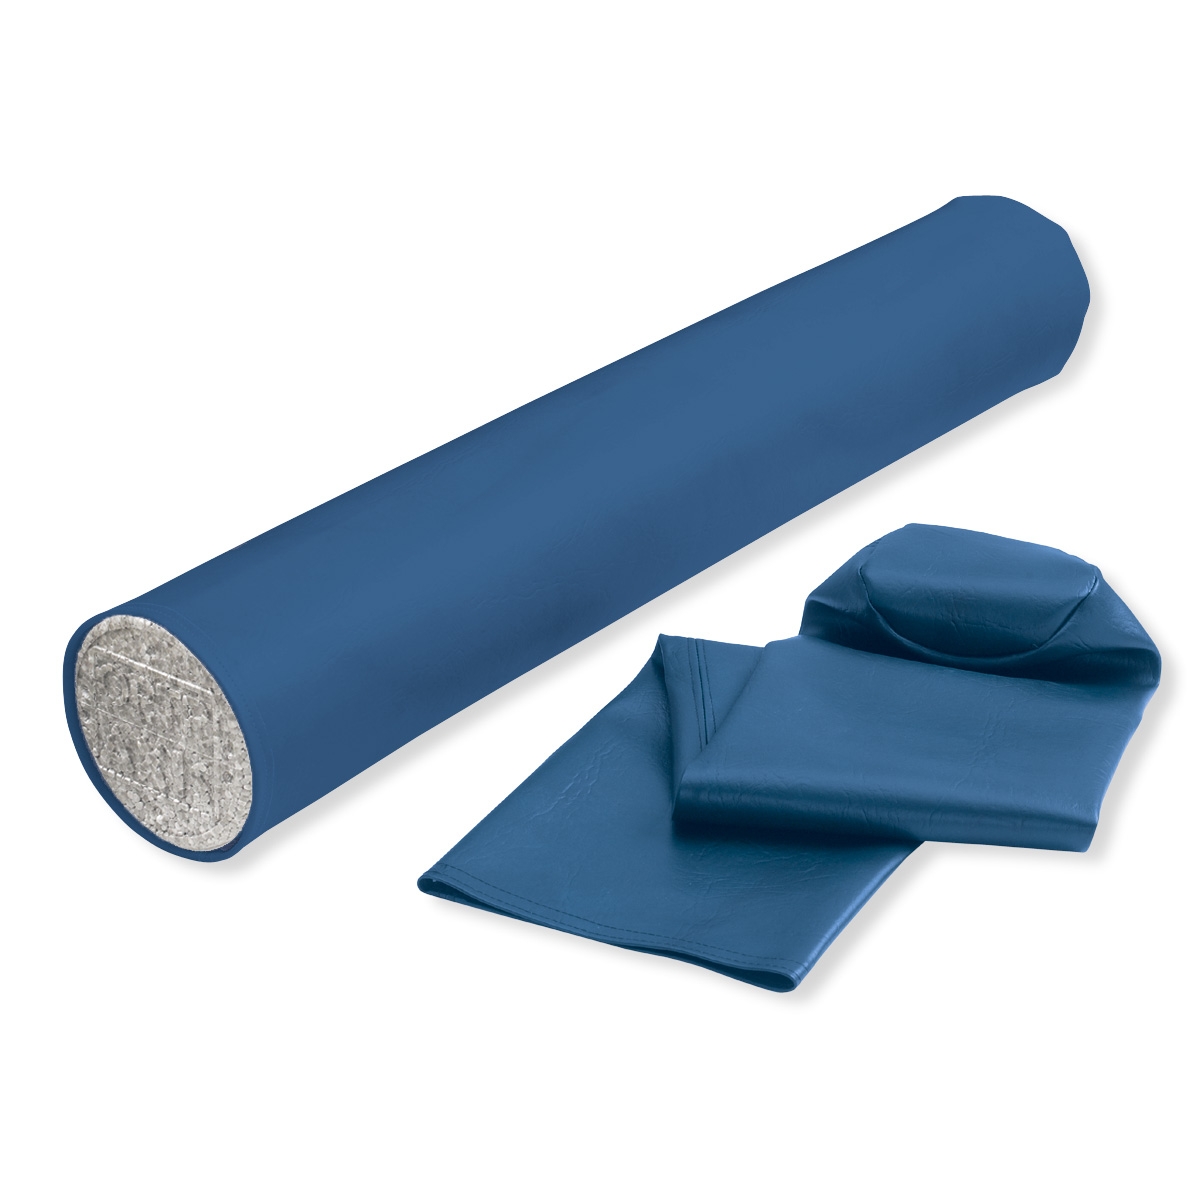 Rolled covering. Roller Cover. Car Cover Rollers.